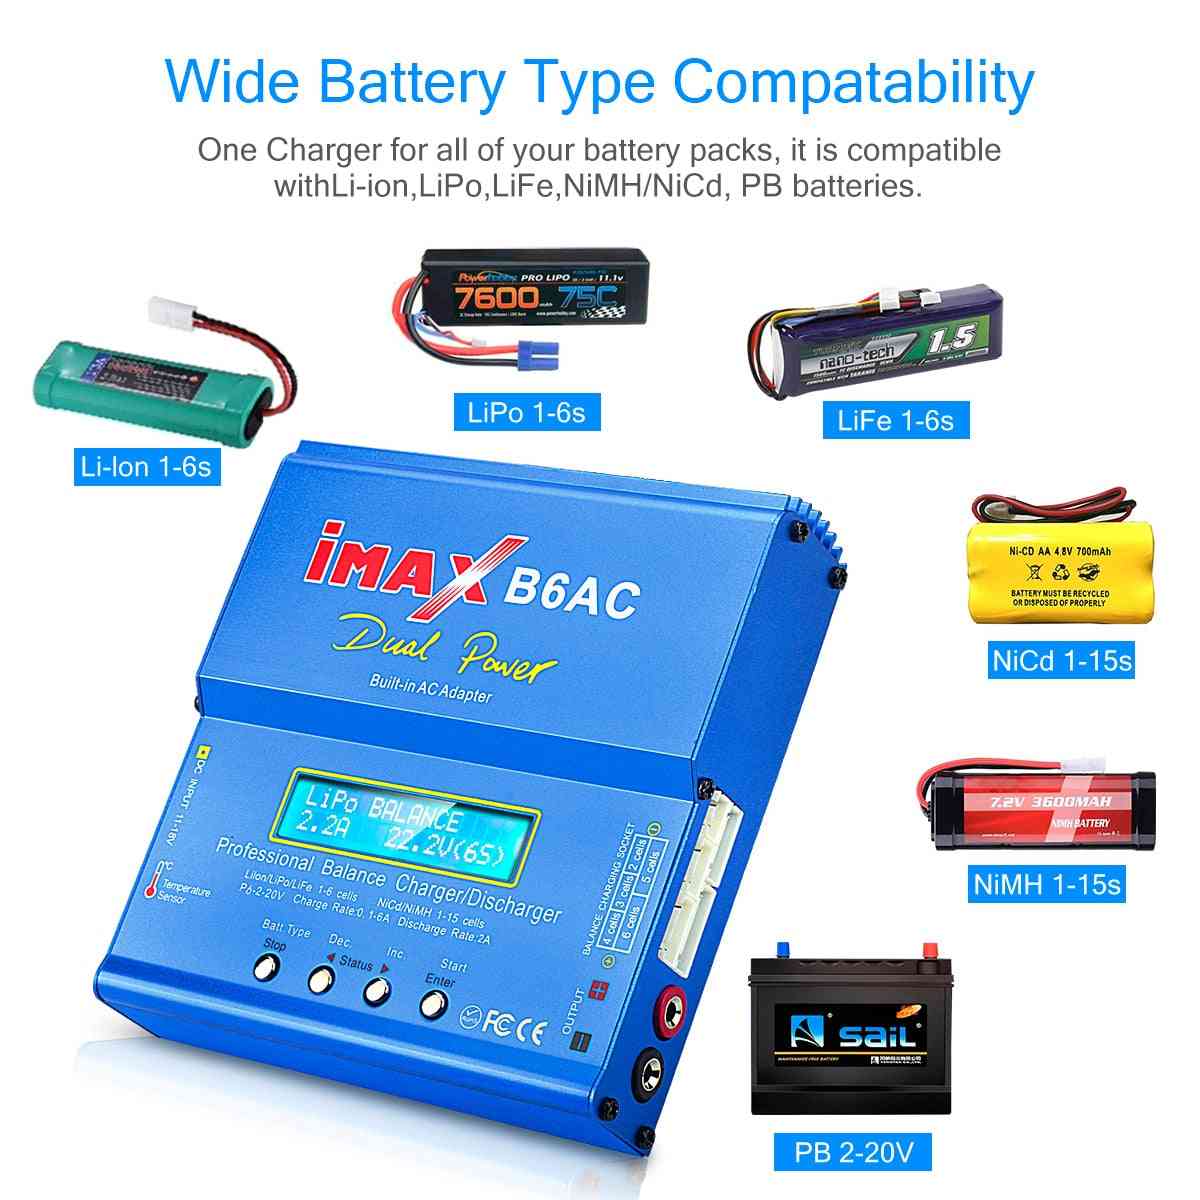 Ac Rc Charger, Battery Balance Charger